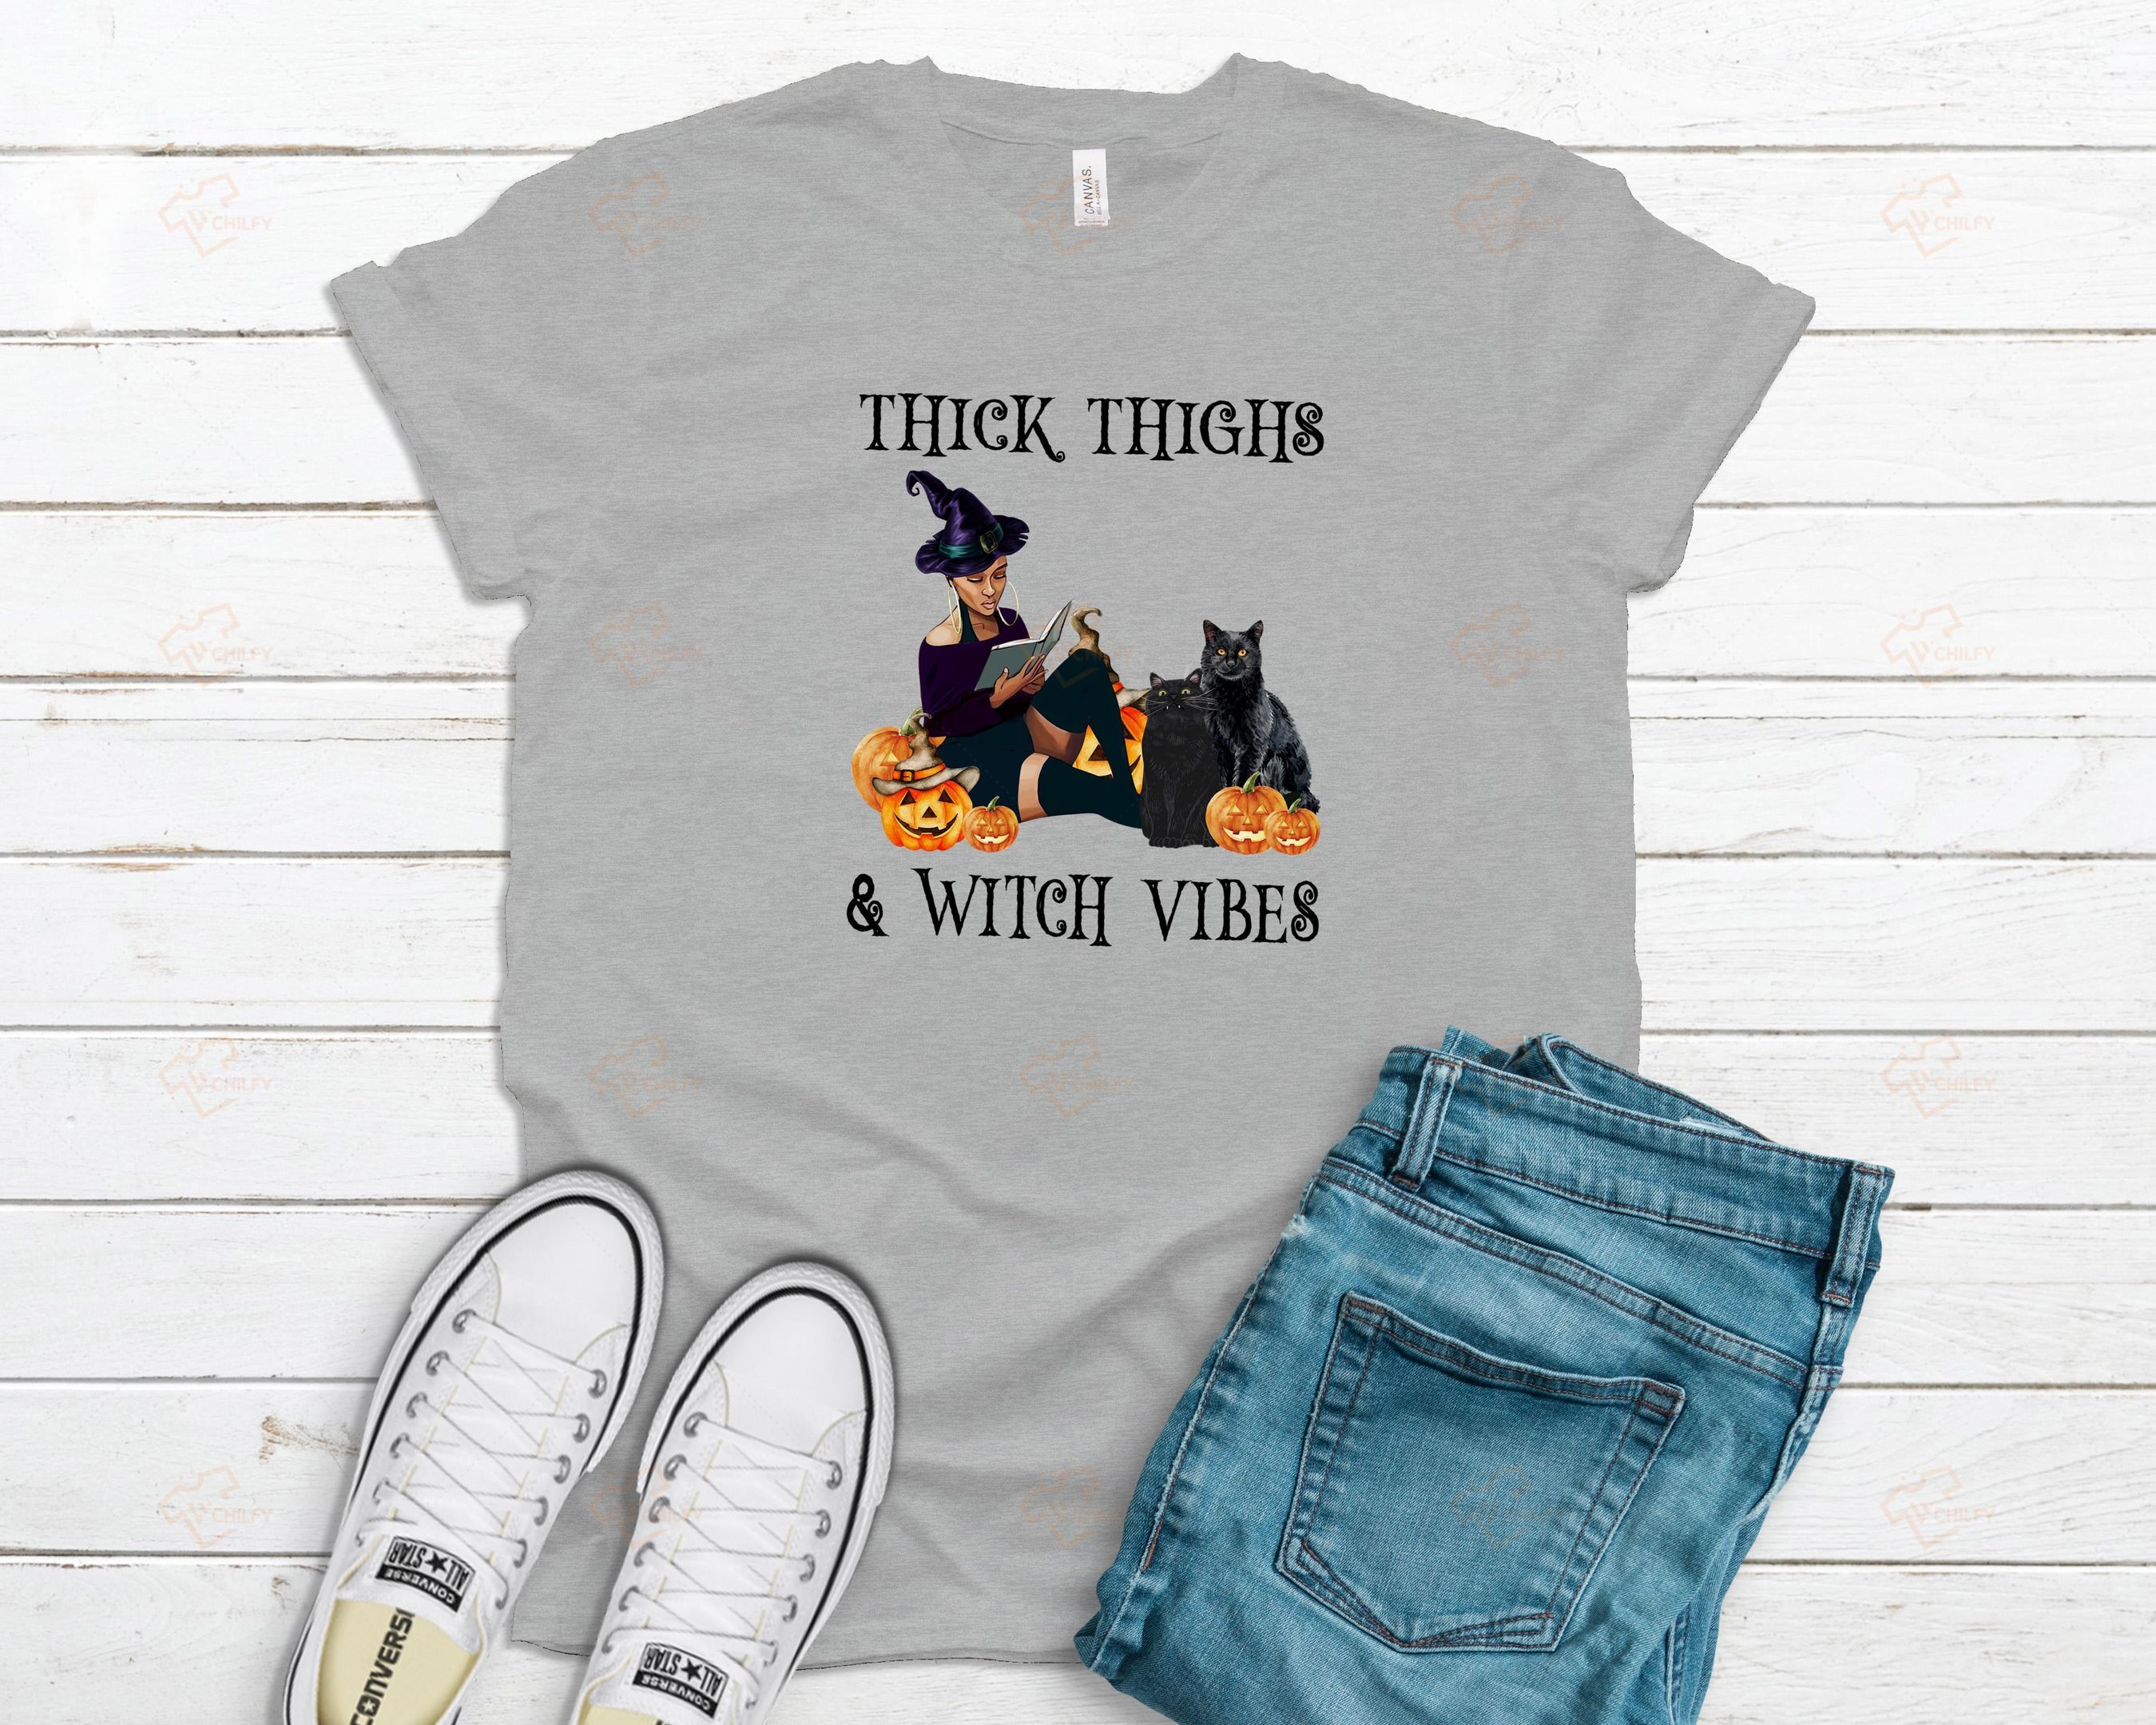 Thick thighs and witch vibes shirt, Afro girl shirt, Black girl shirt